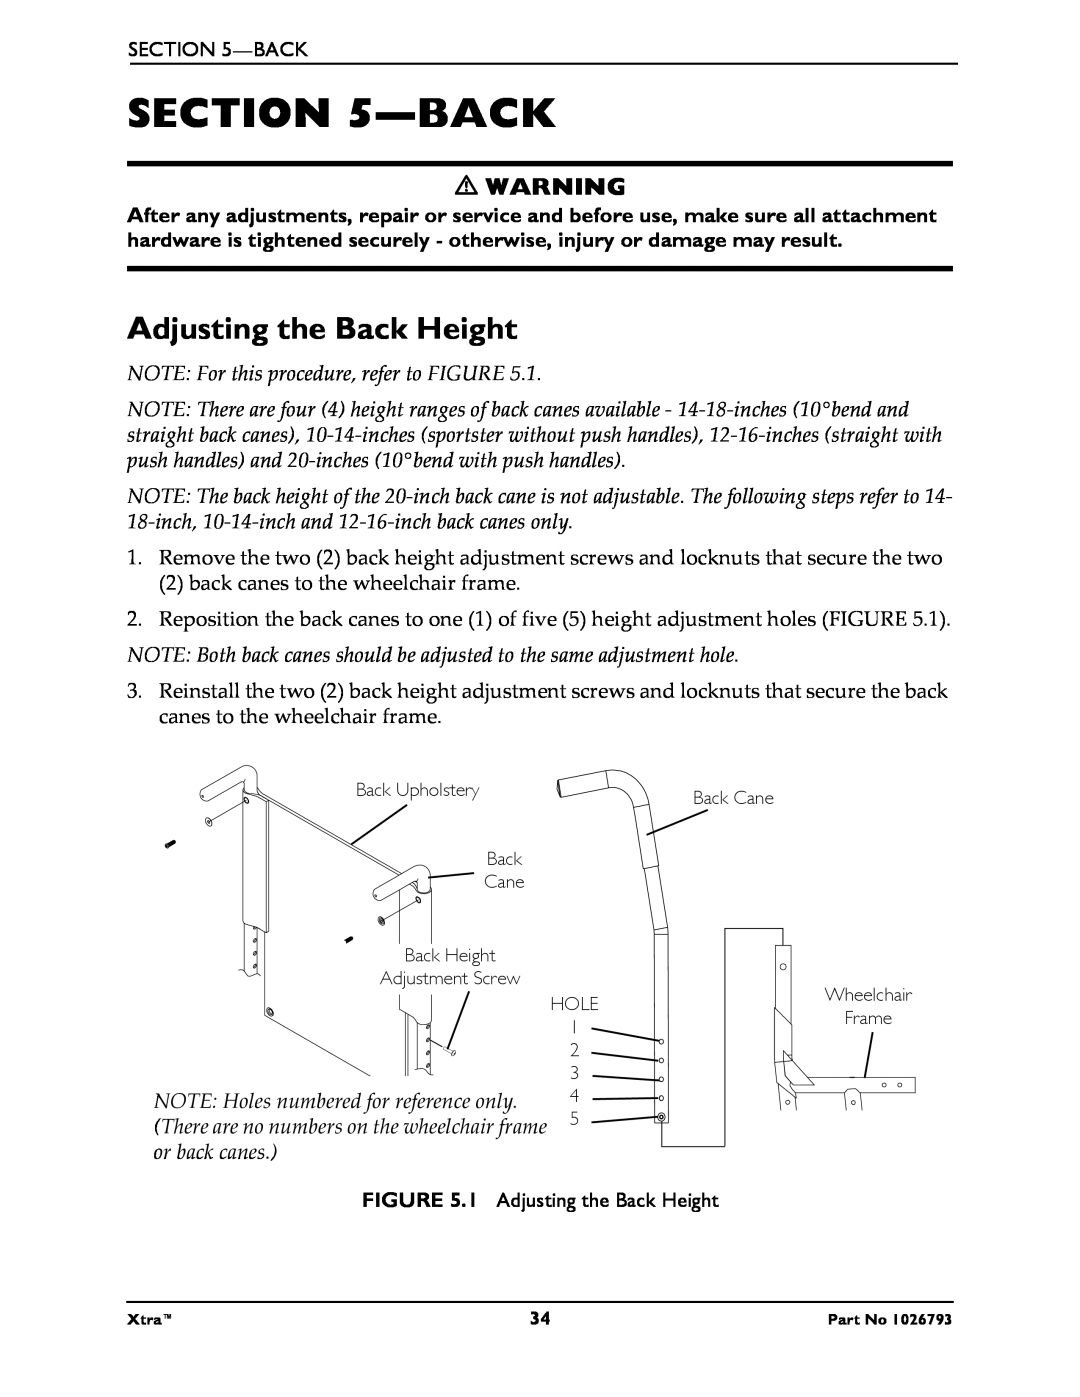 Invacare 1026793 manual Adjusting the Back Height, NOTE For this procedure, refer to FIGURE, or back canes 